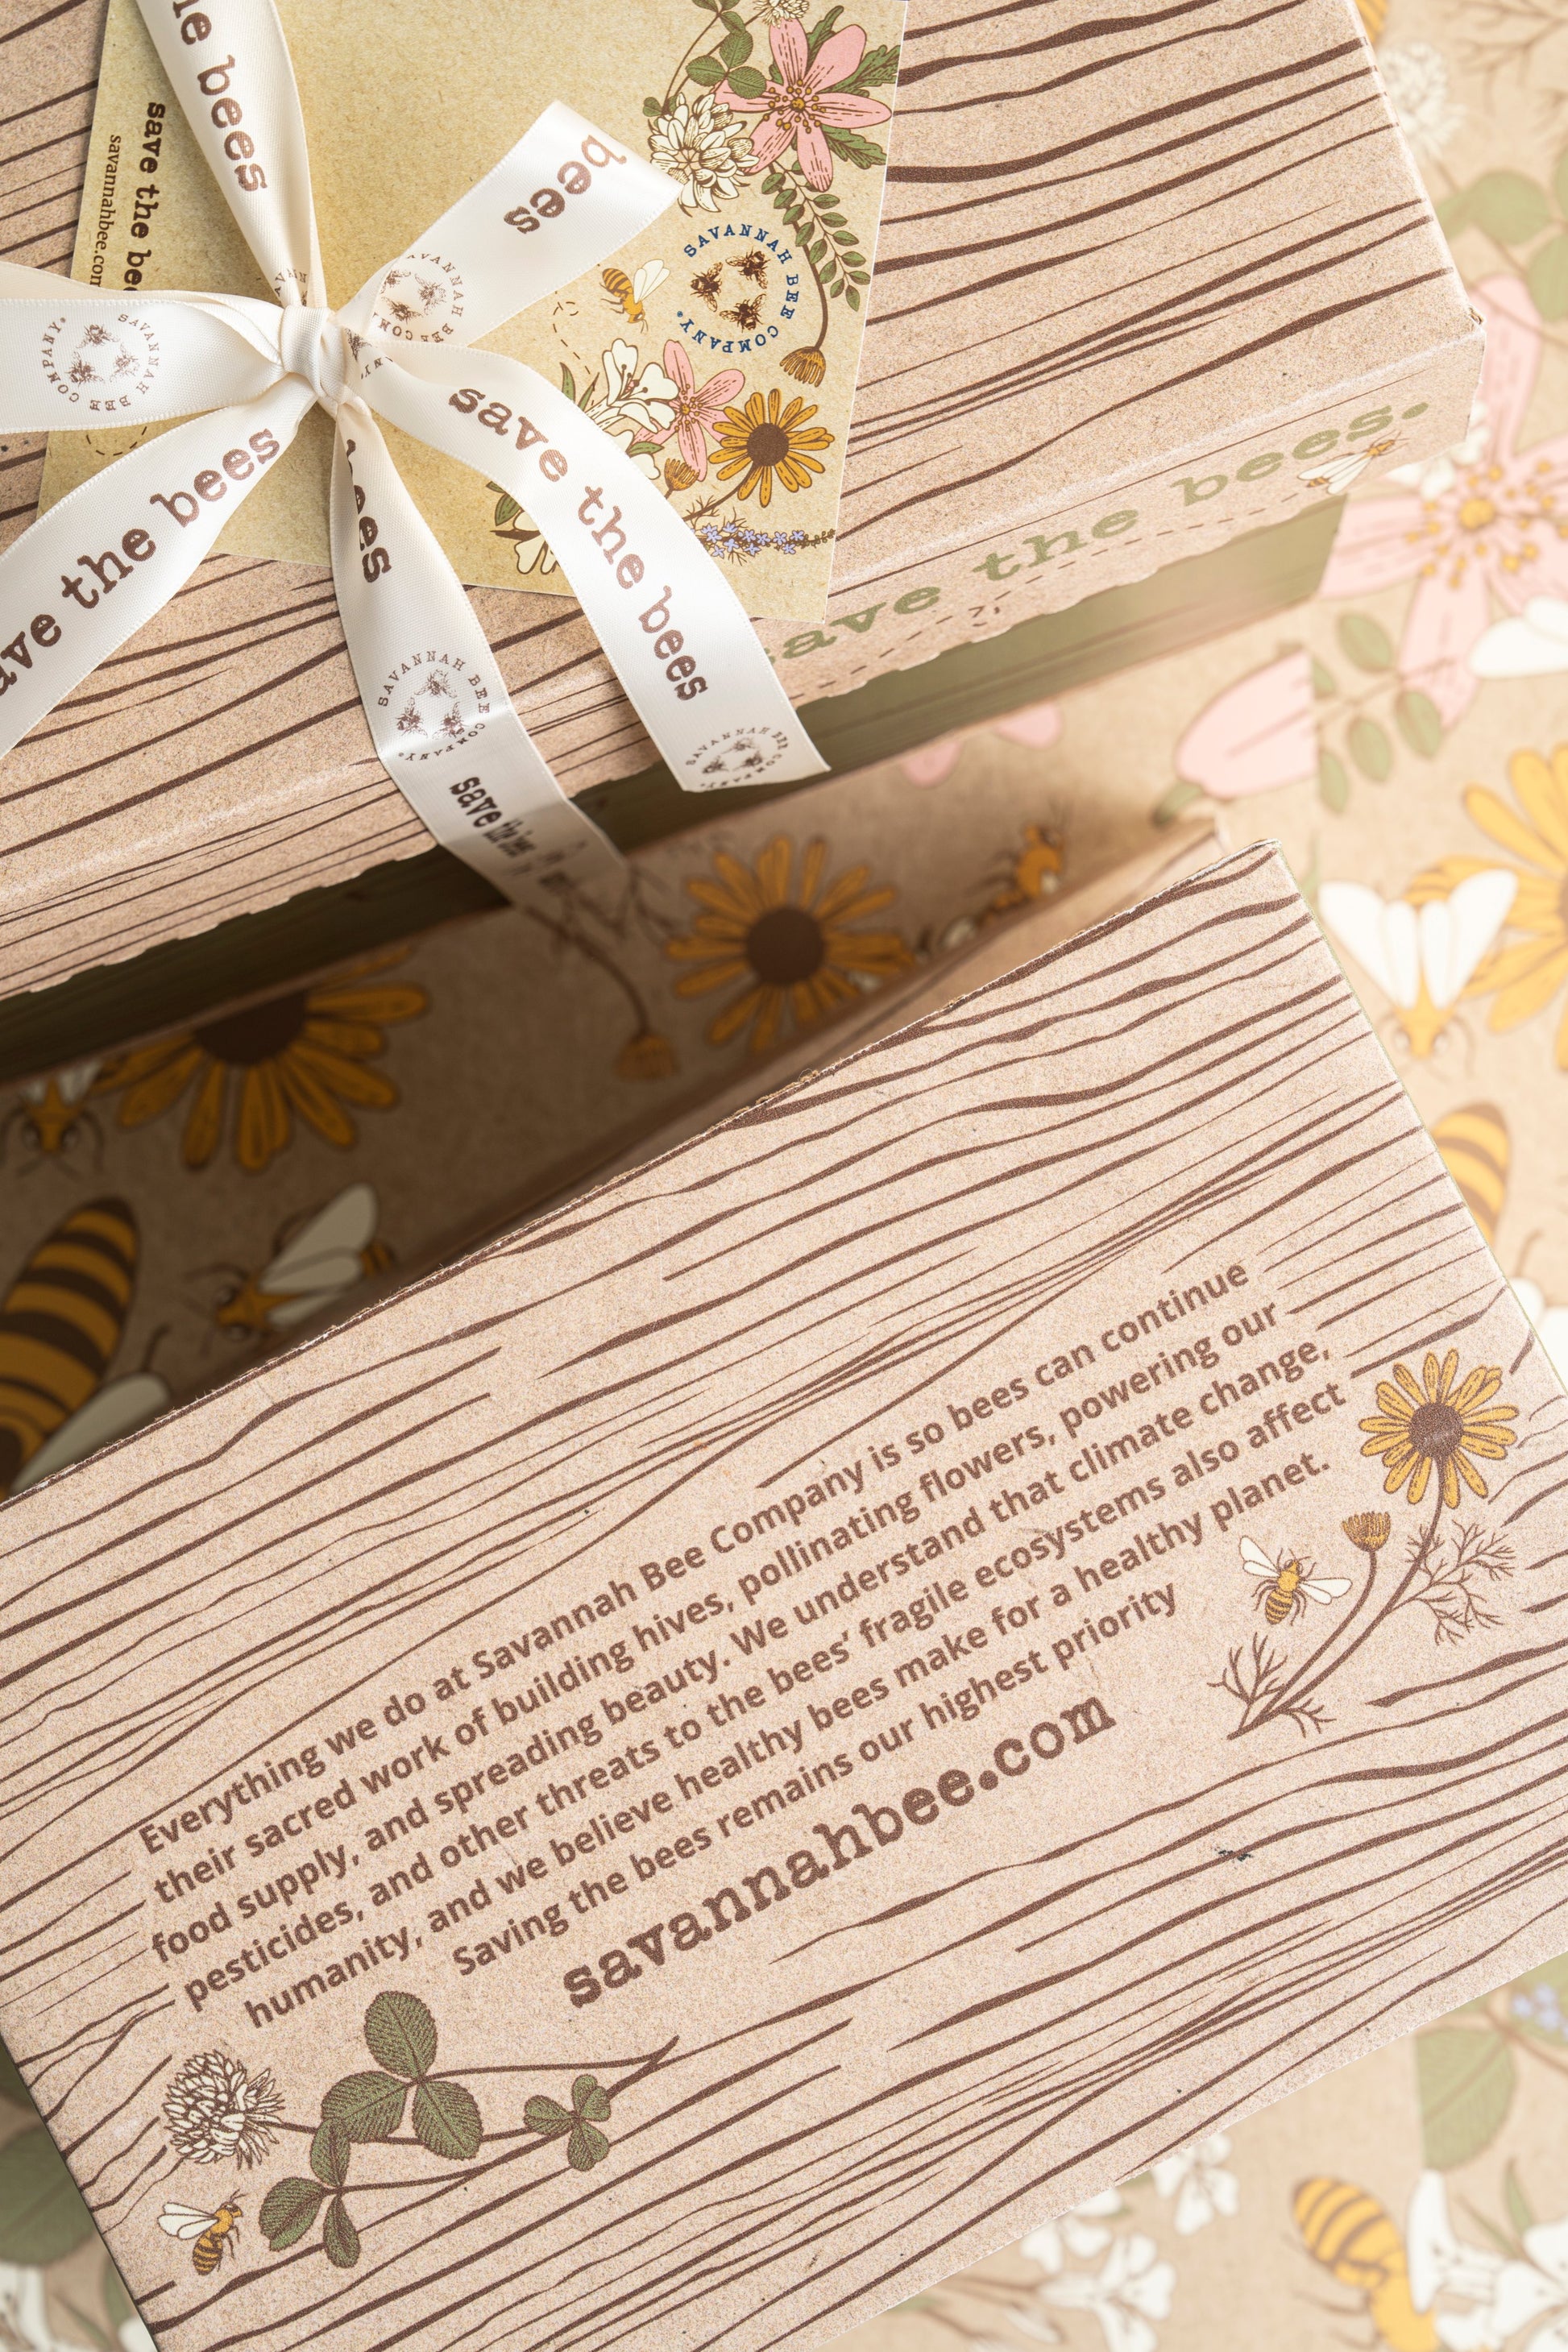 The bottom of a save the bees gift box with a quote and the savannah bee company website